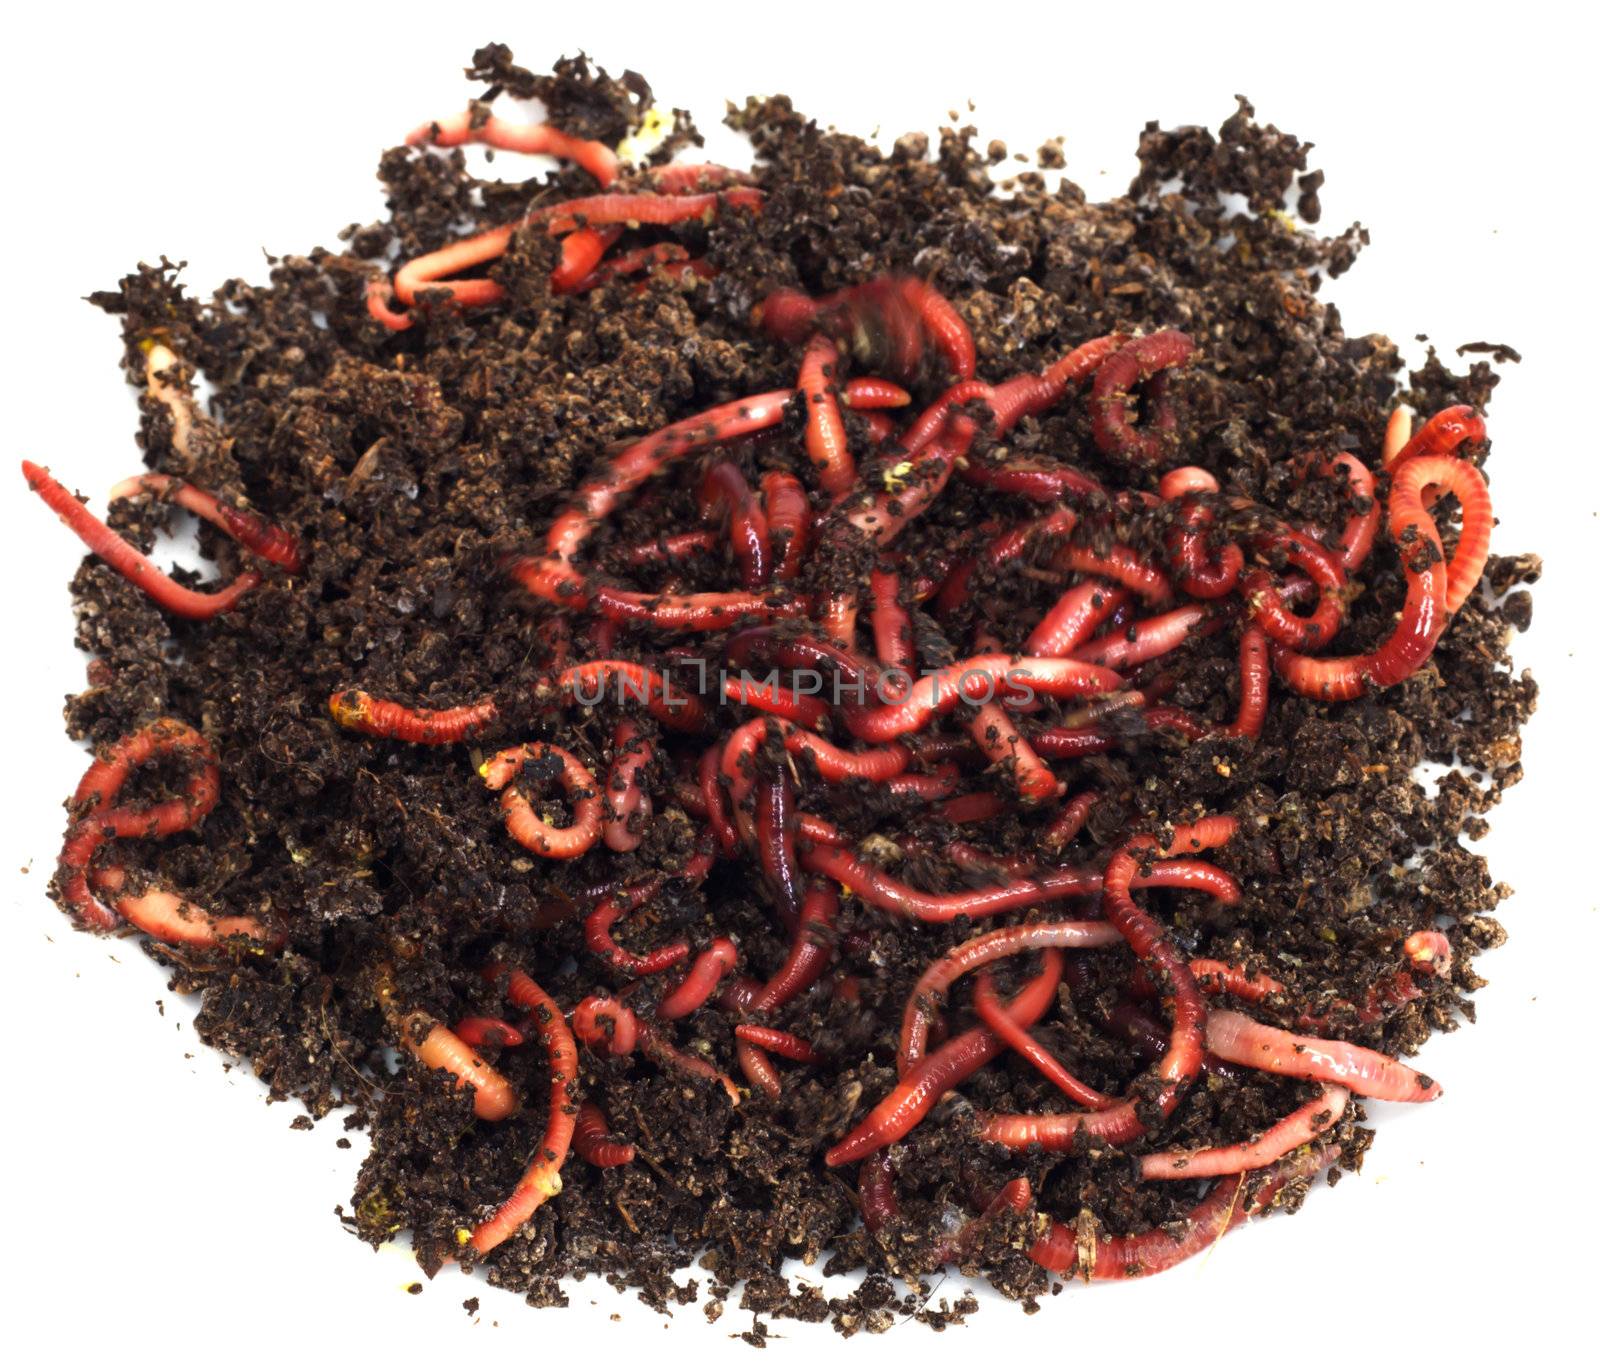 red worms in compost - bait for fishing  by schankz